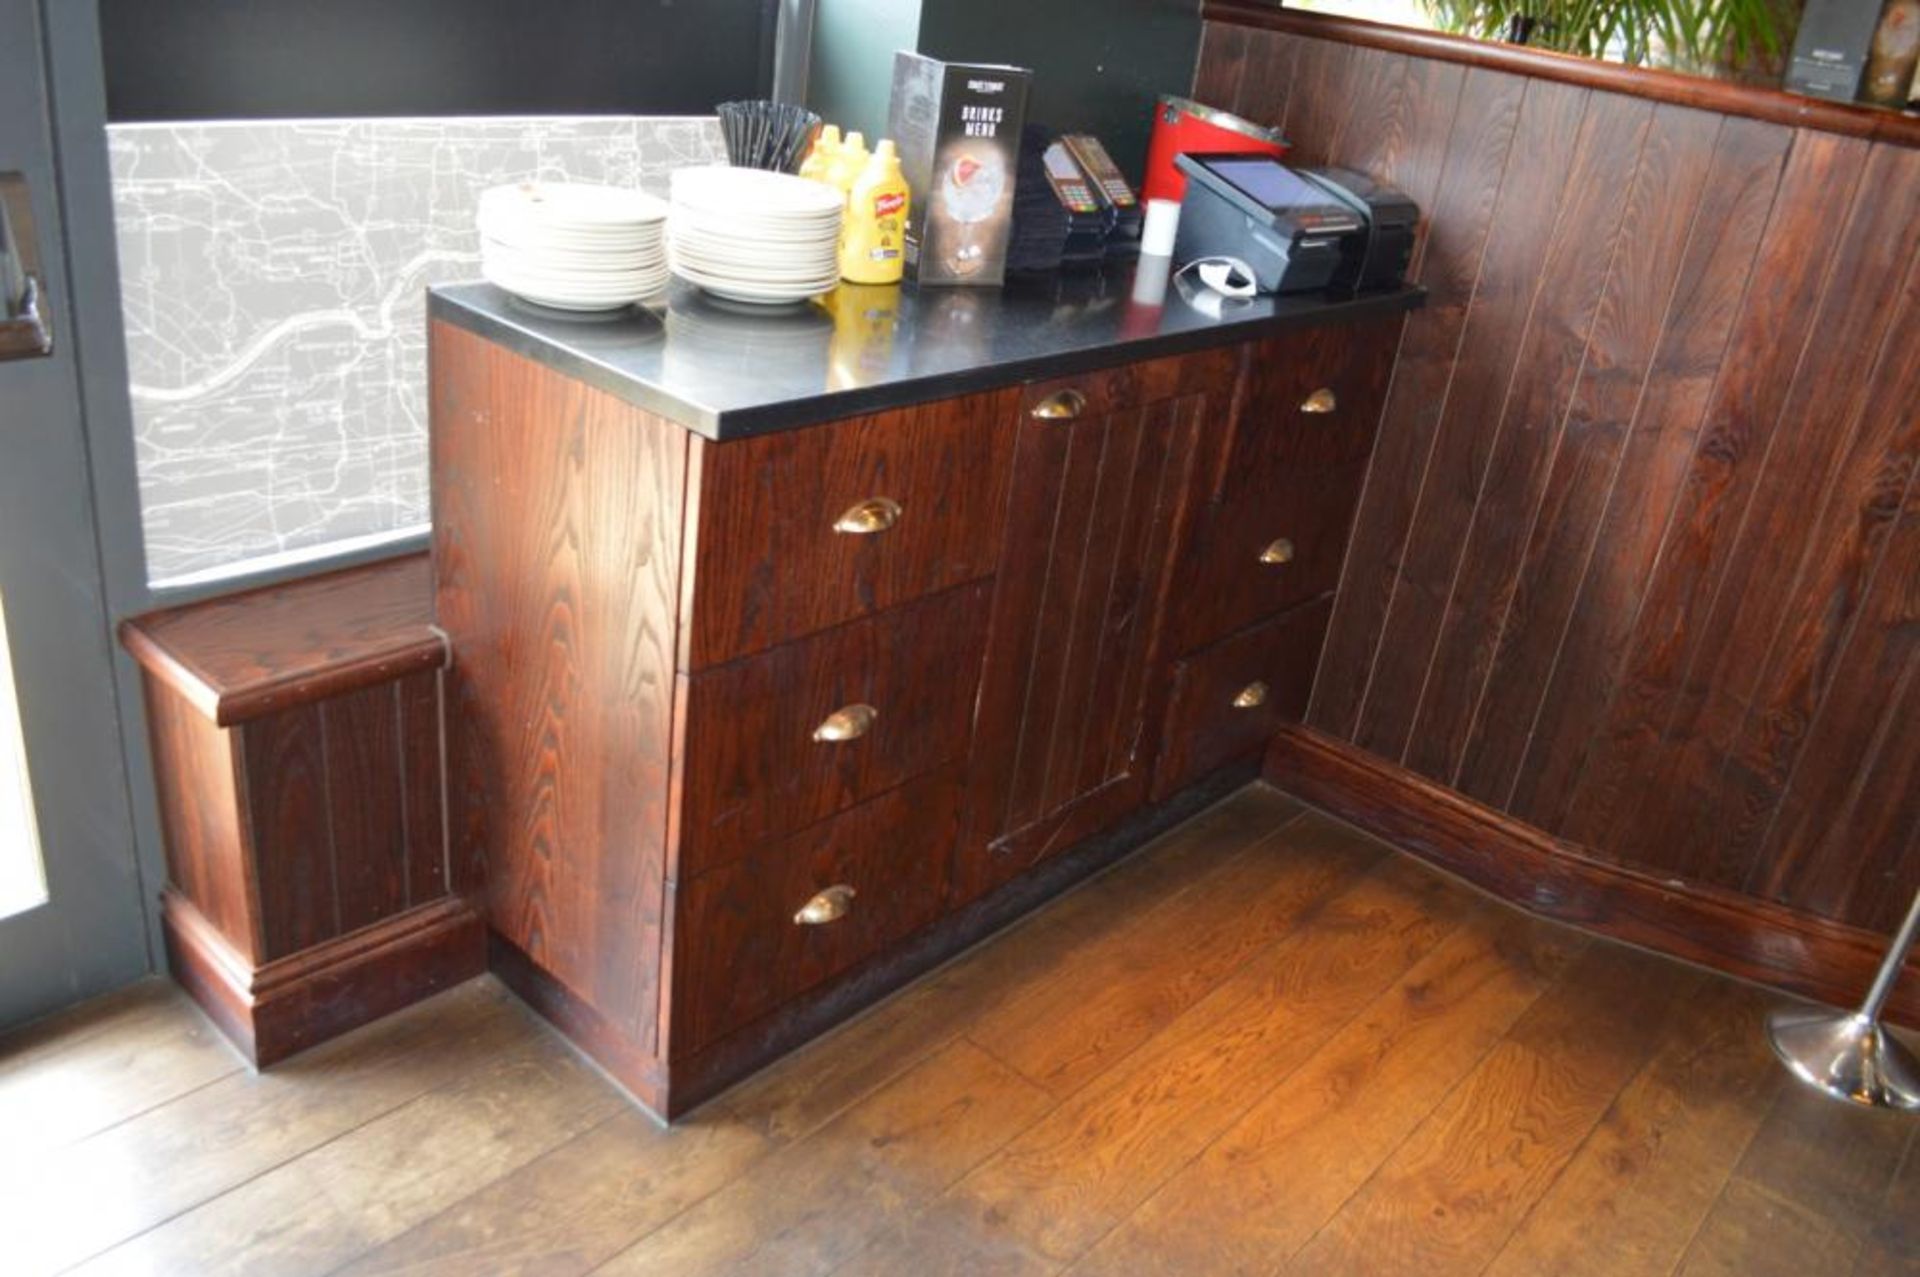 1 x Waitress Server Counter With Dark Wood Finish, Brass Hardware and Stone Top - H96 x W150 x D52 - Image 3 of 11